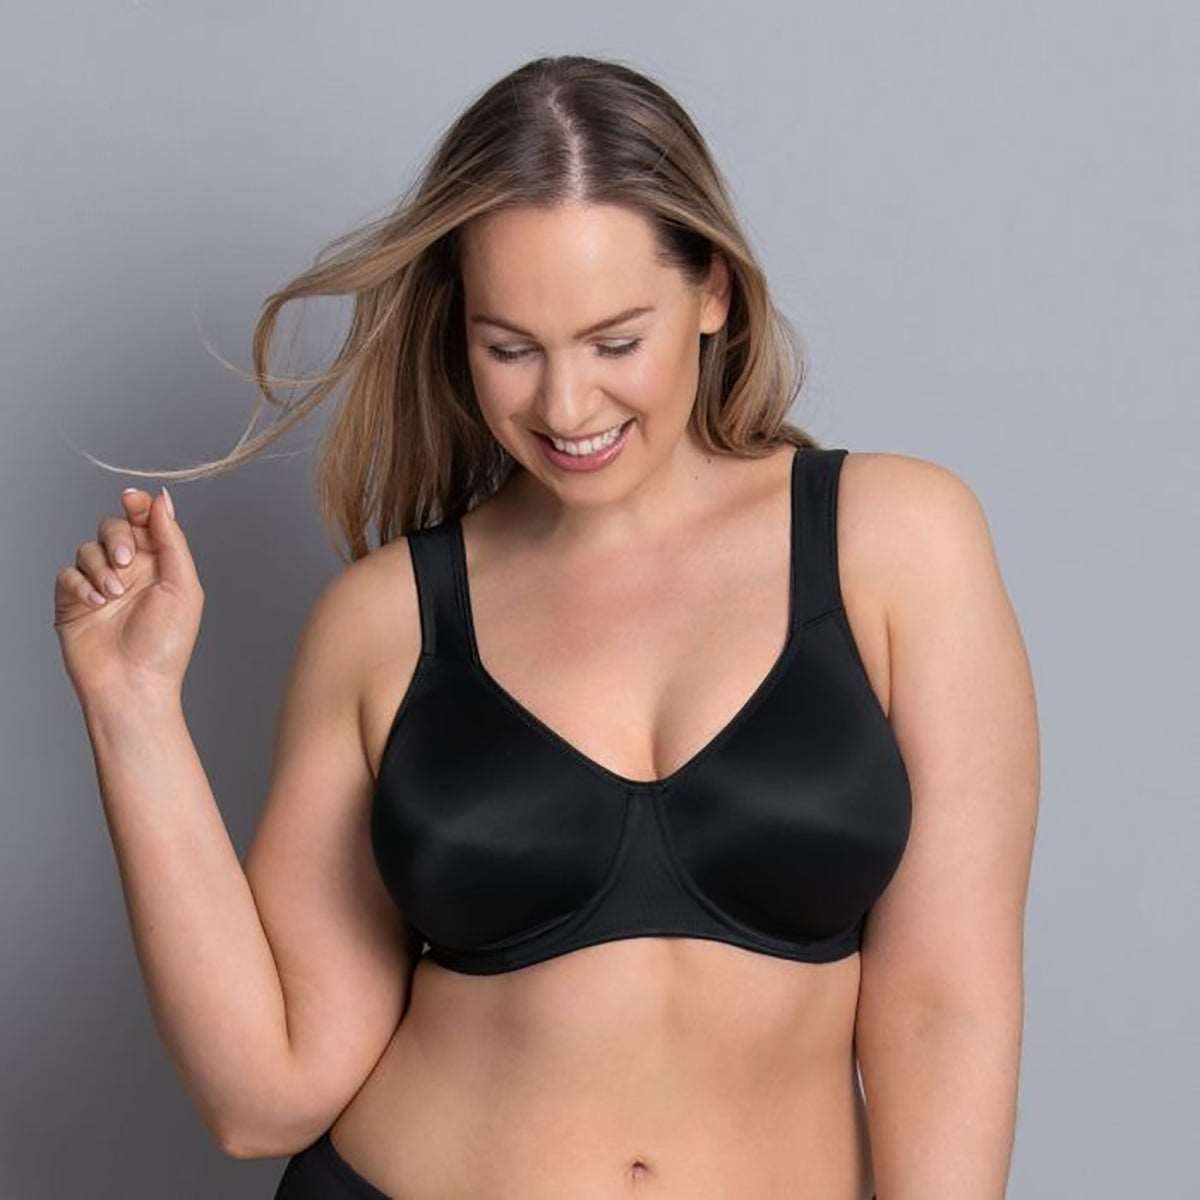 Twin Art underwire bra with seamless cups